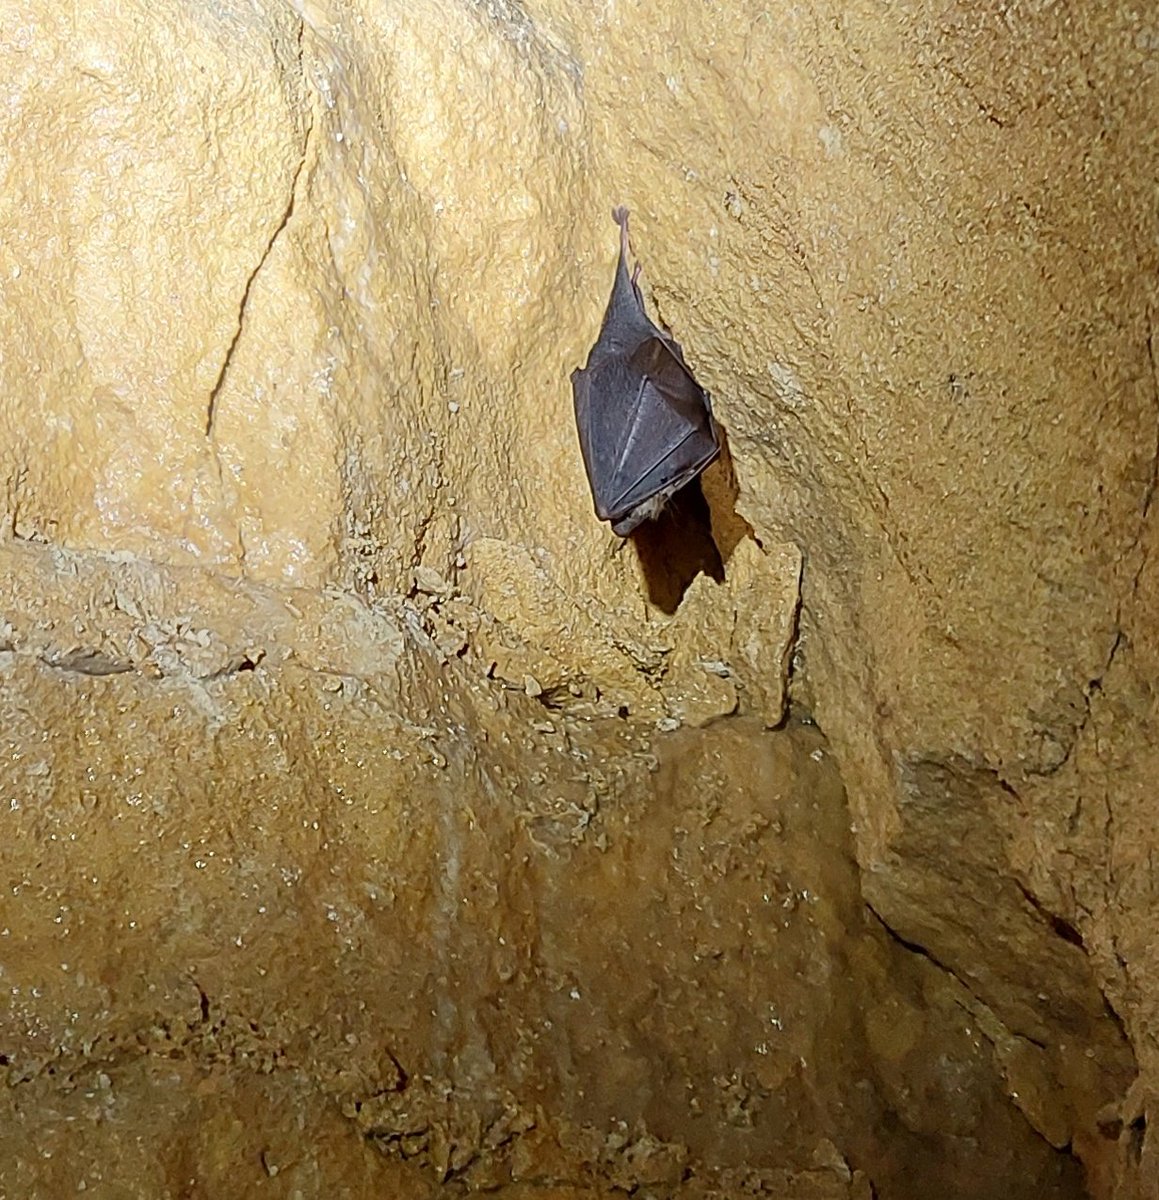 Another day monitoring bats deep in the Bath Stone Mines. I am always amazed they find tiny crevices to cling to in the complete darkness. 🦇🦇